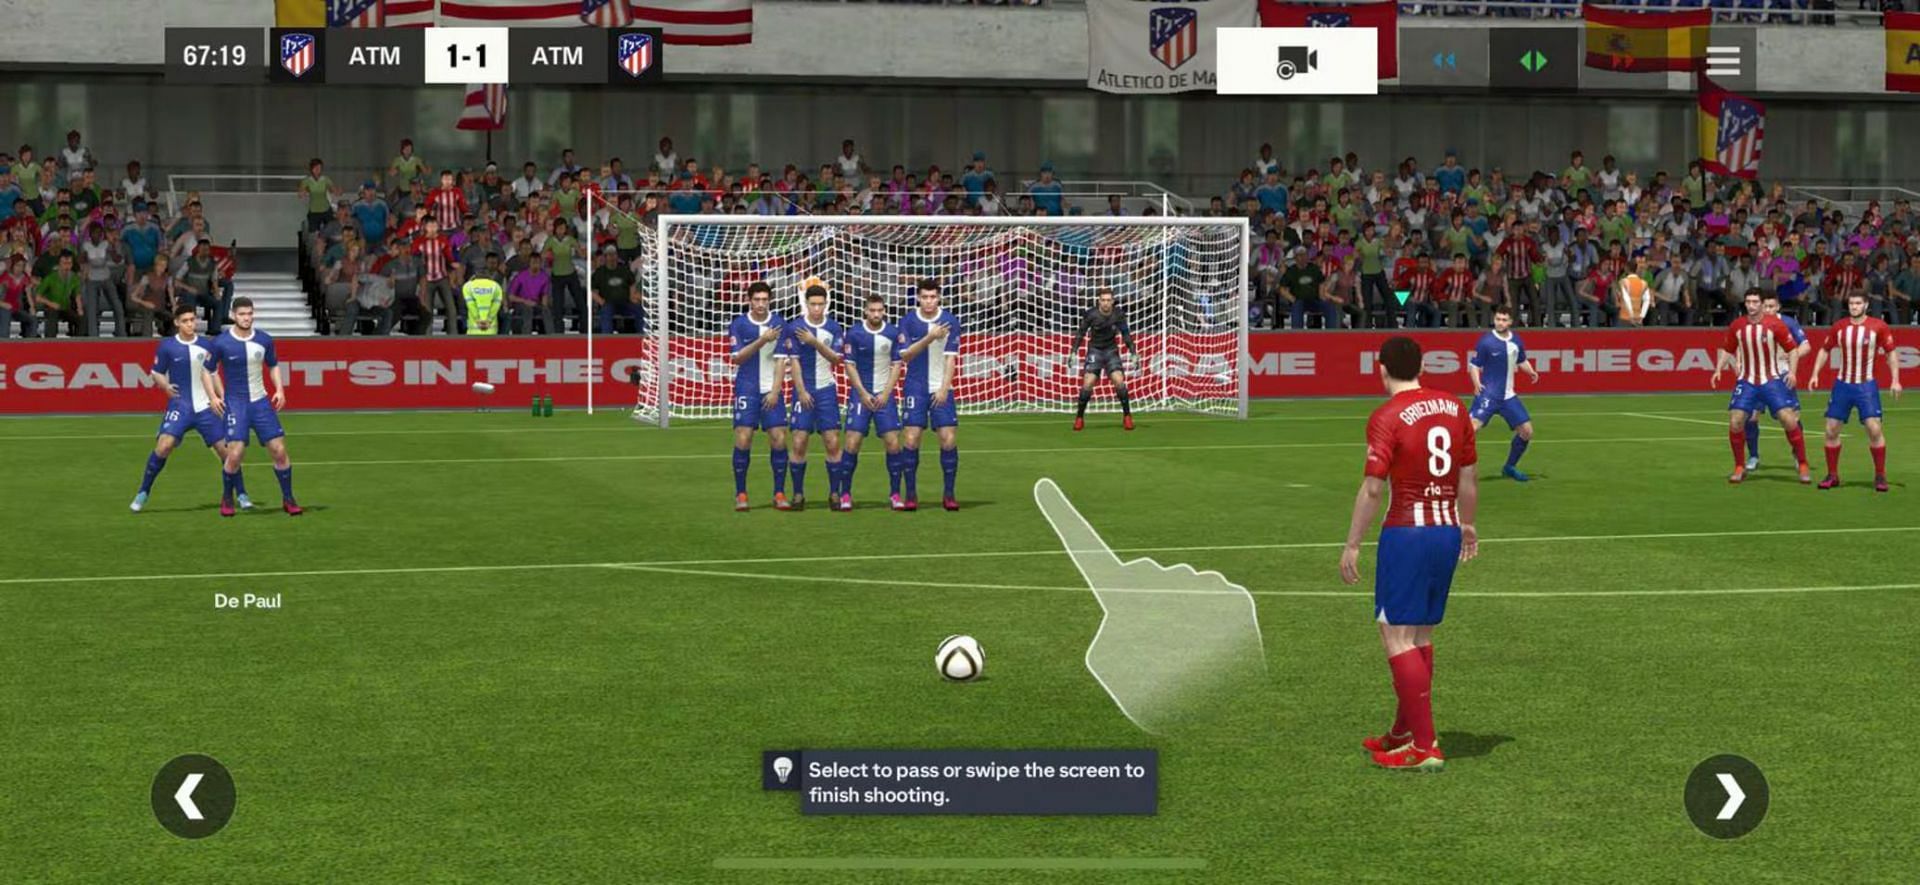 Perfecting set-pieces like free kicks and corners is an easy way to score goals in EA FC Mobile (Image vis EA Sports)